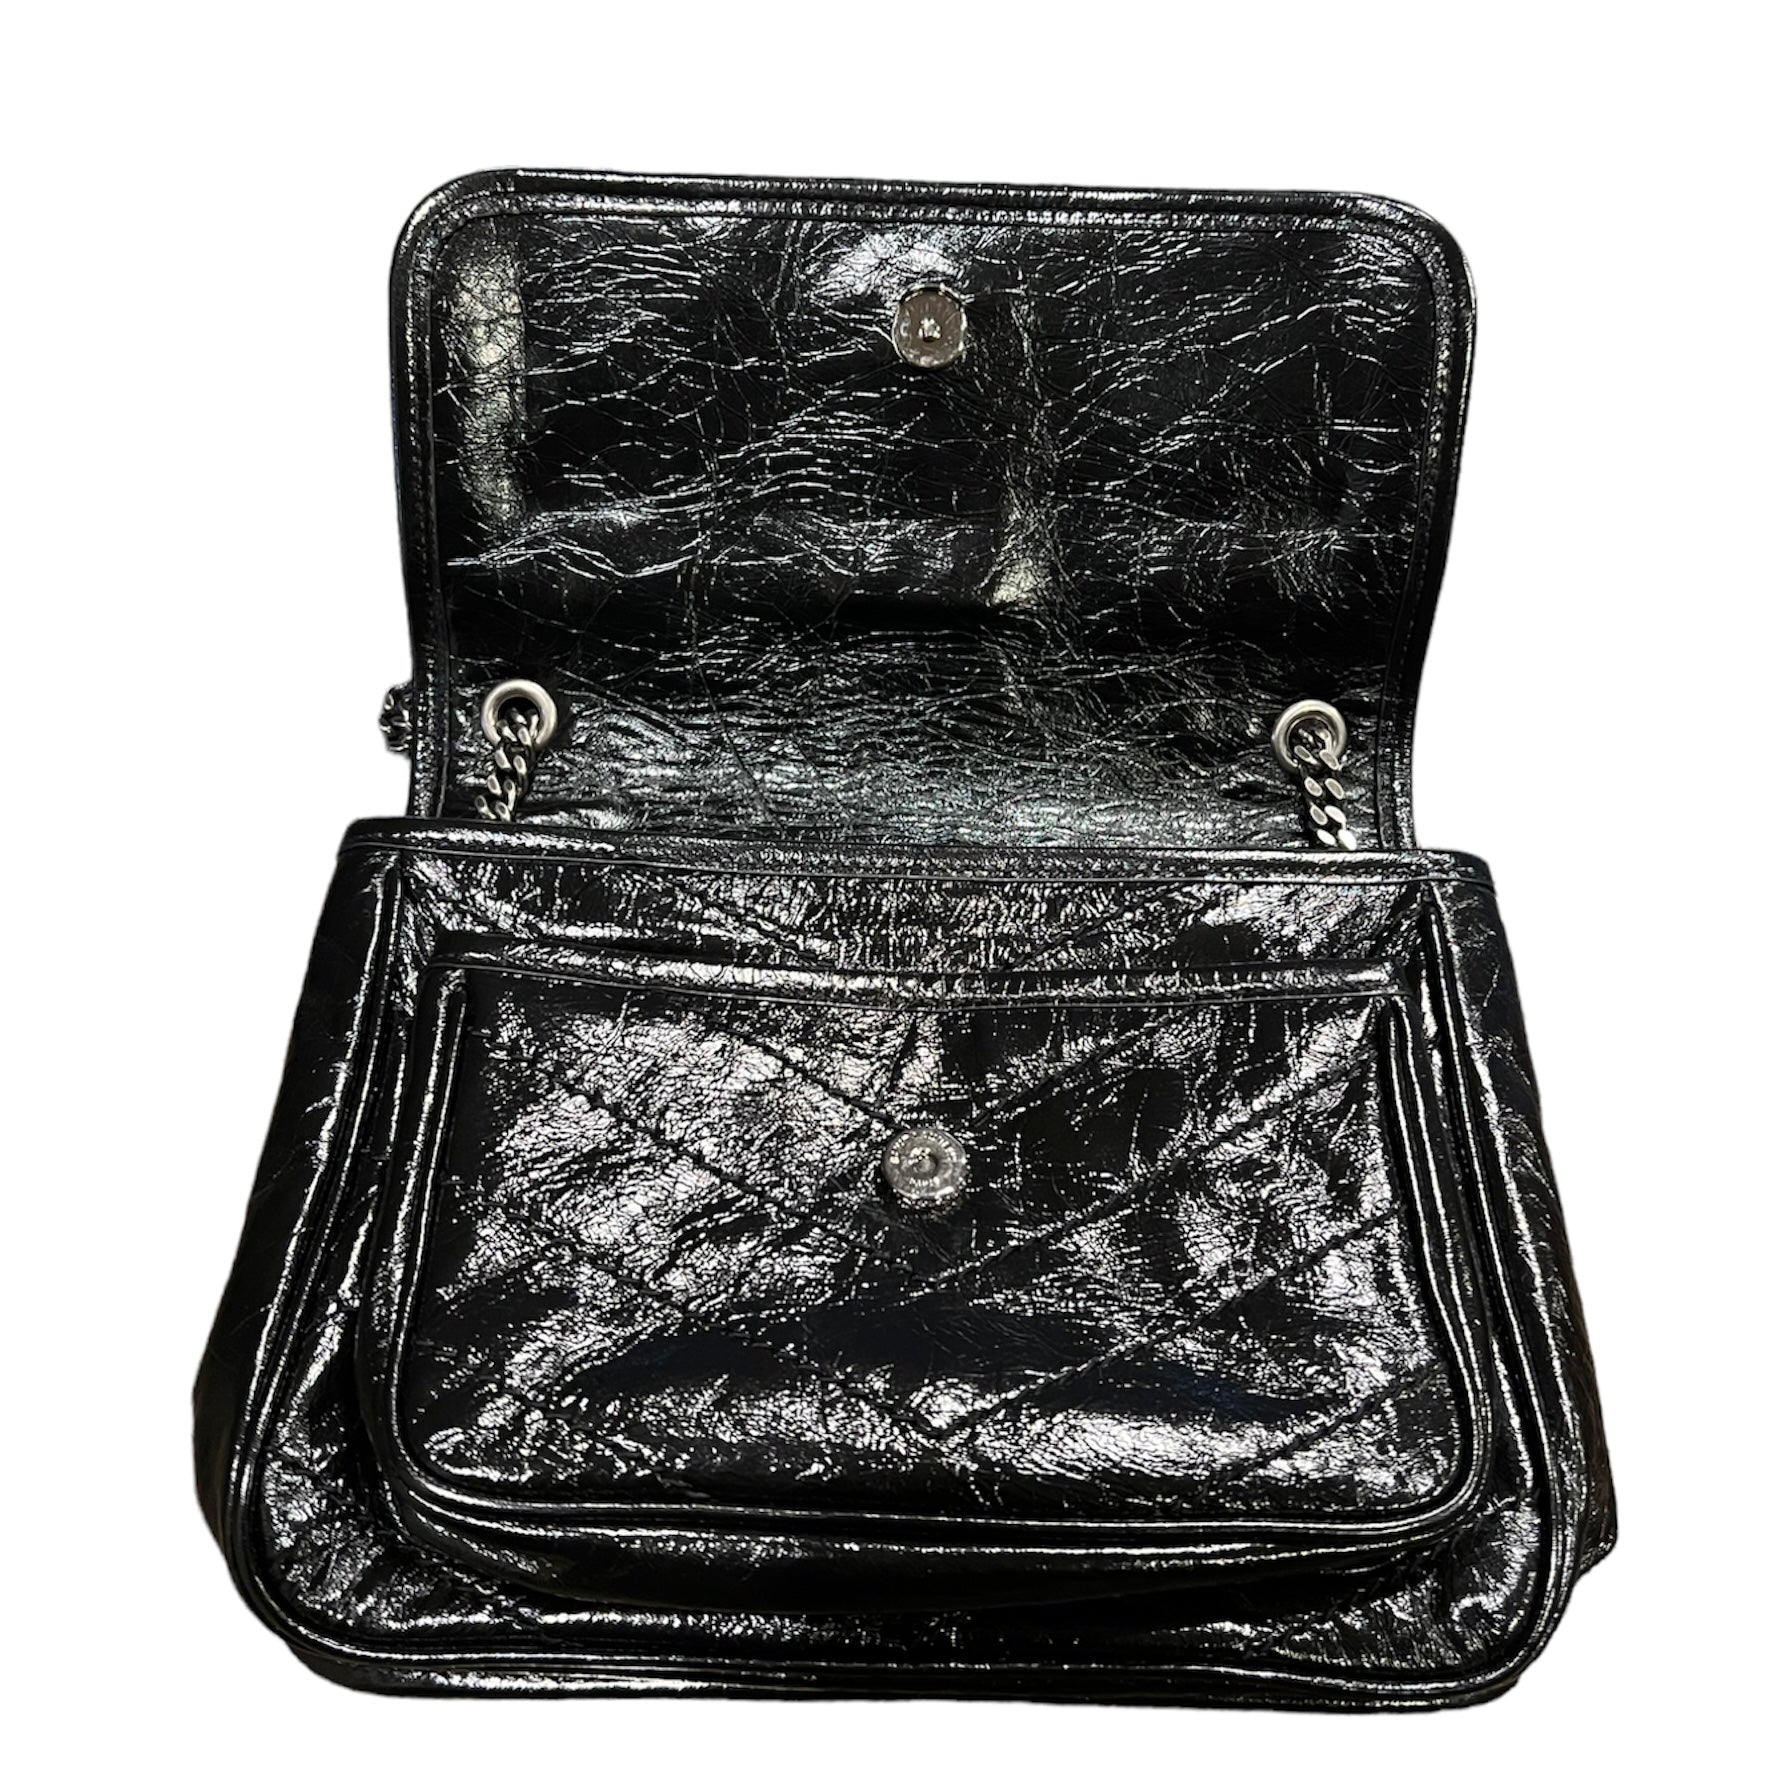 Saint Laurent Niki Baby Quilted Leather Crossbody